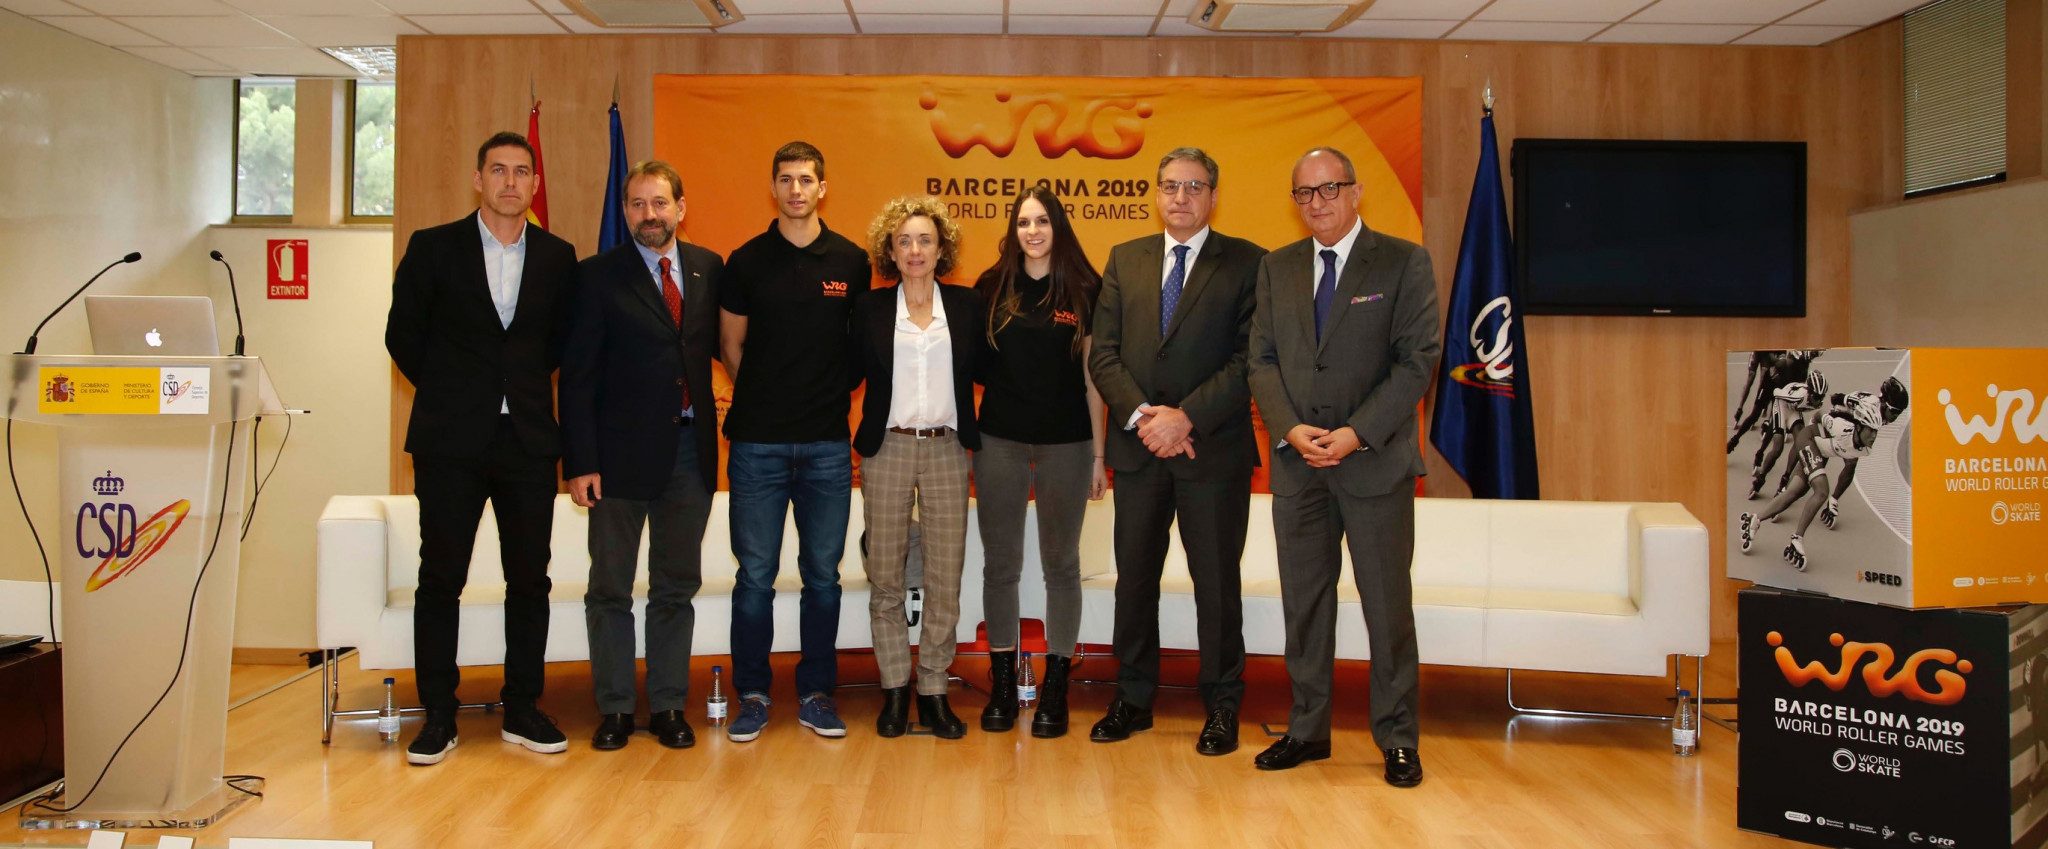 The presentation of the 2019 World Roller Games in Barcelona was attended by various officials including the event's Organising Committee President Ramon Basiana, second from left, ©WRG 2019